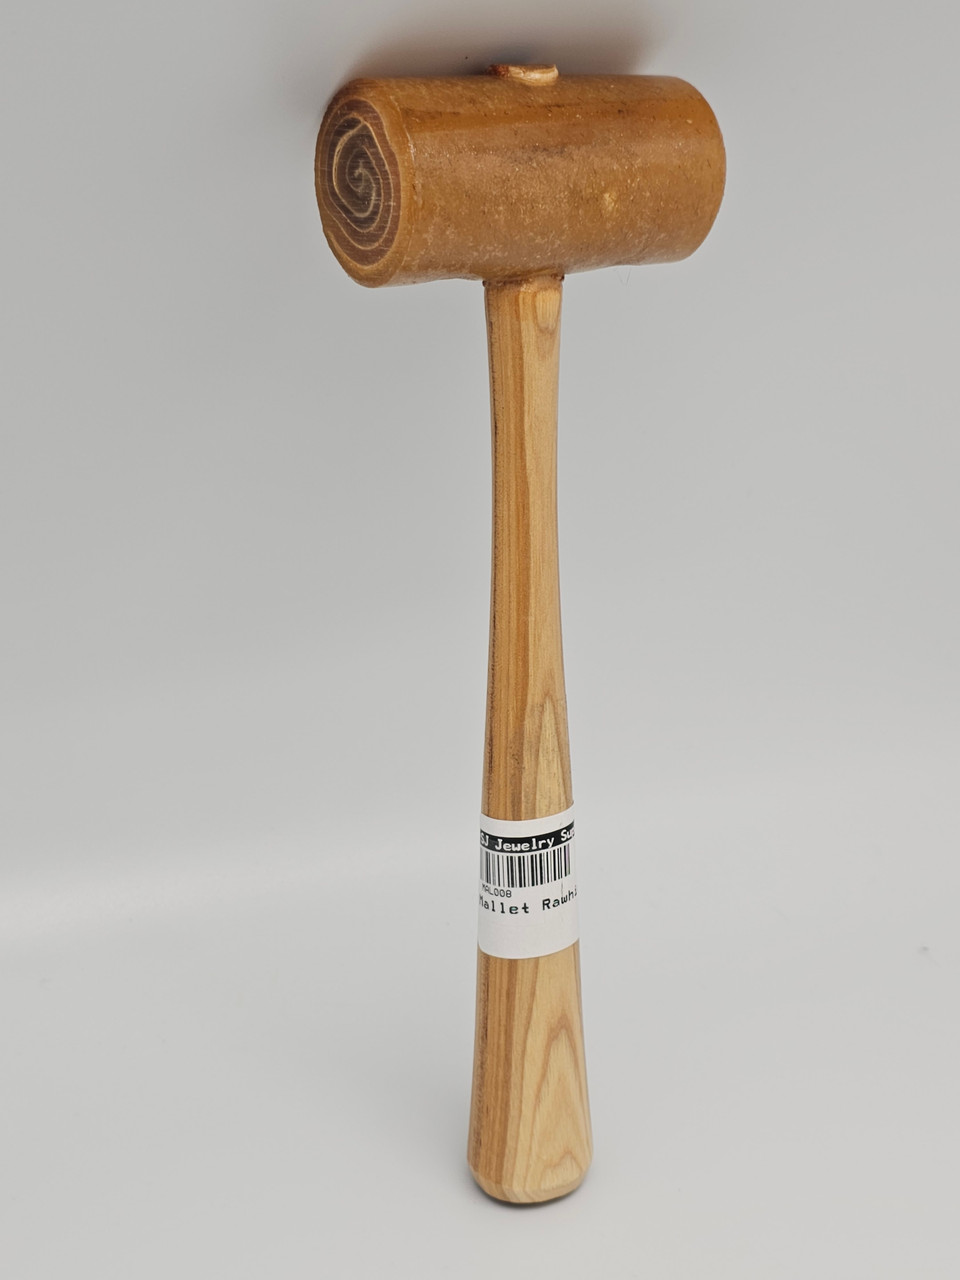 Rawhide Mallet 1'diameter X2 inch Head #0. This Offering Is for 2 Units.